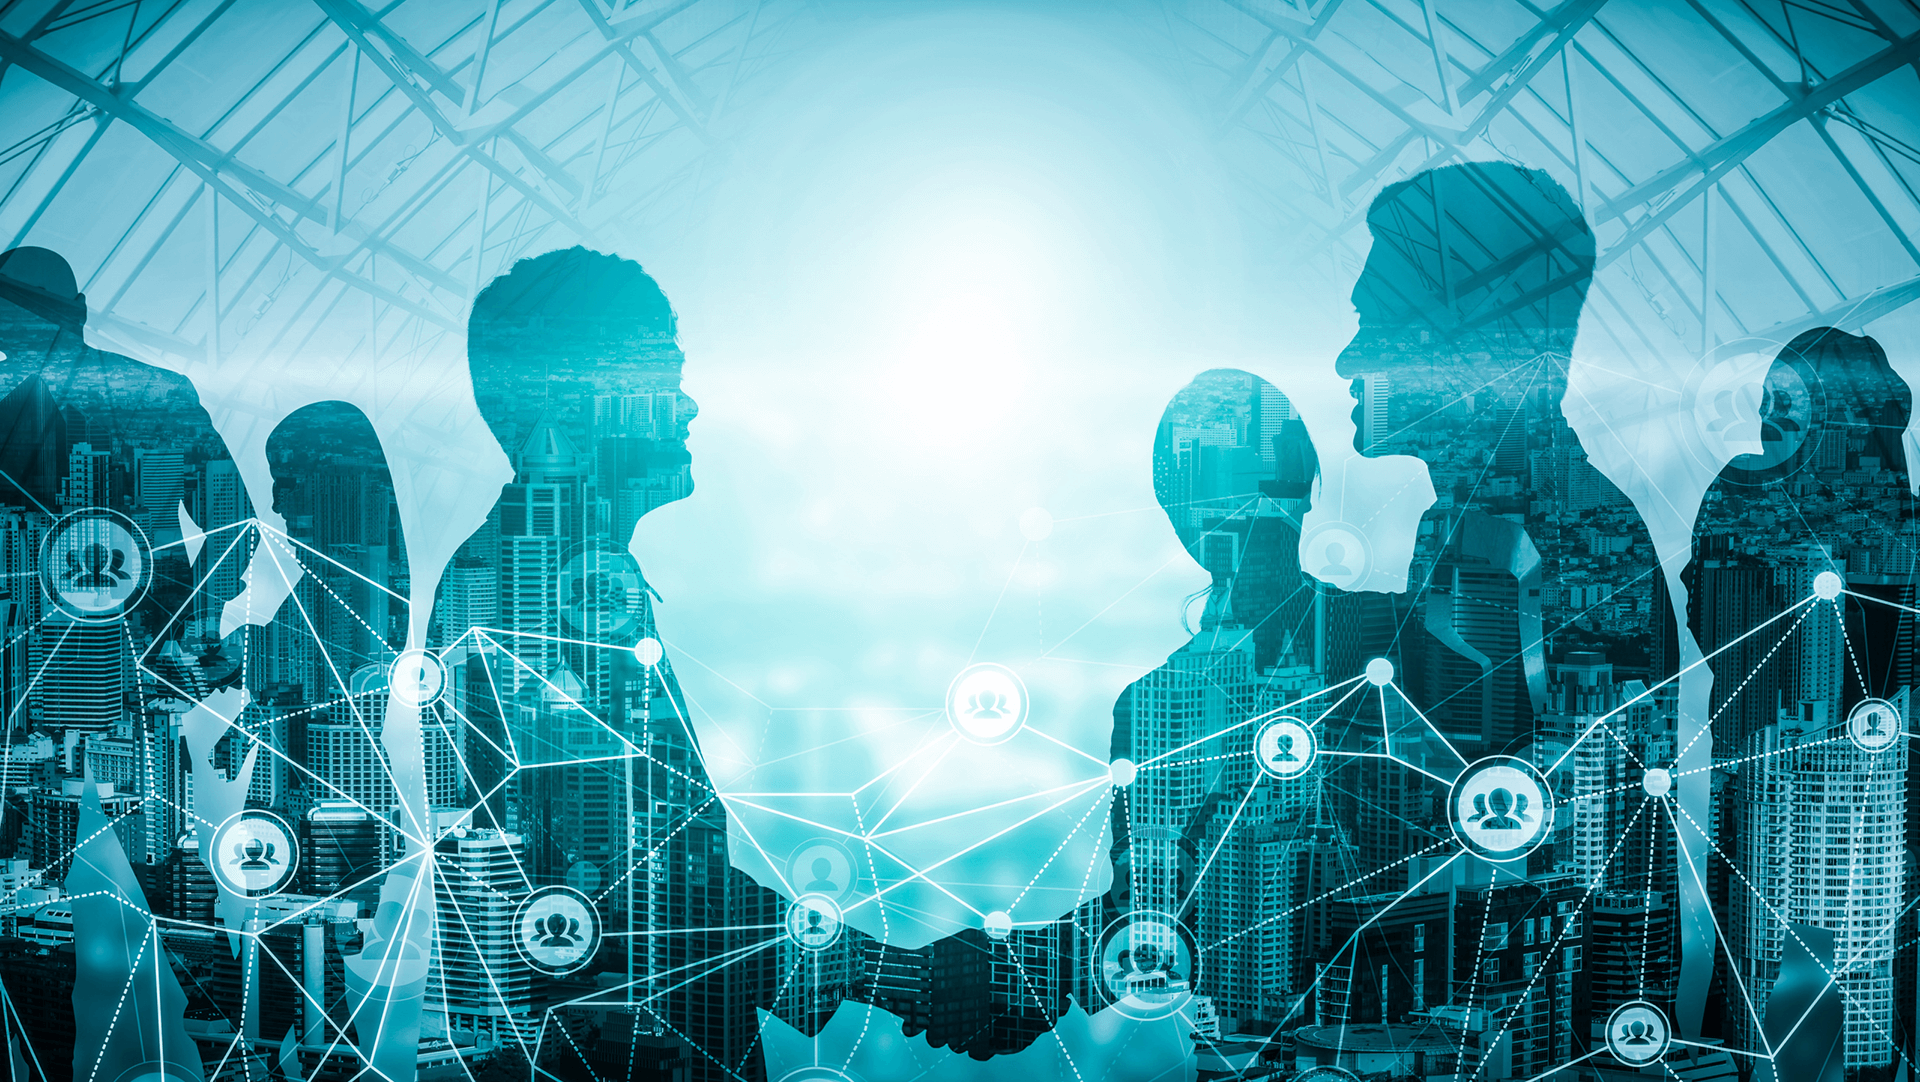 Silhouettes of business professionals overlaid on a futuristic cityscape with network connections symbolizing global communication and collaboration.